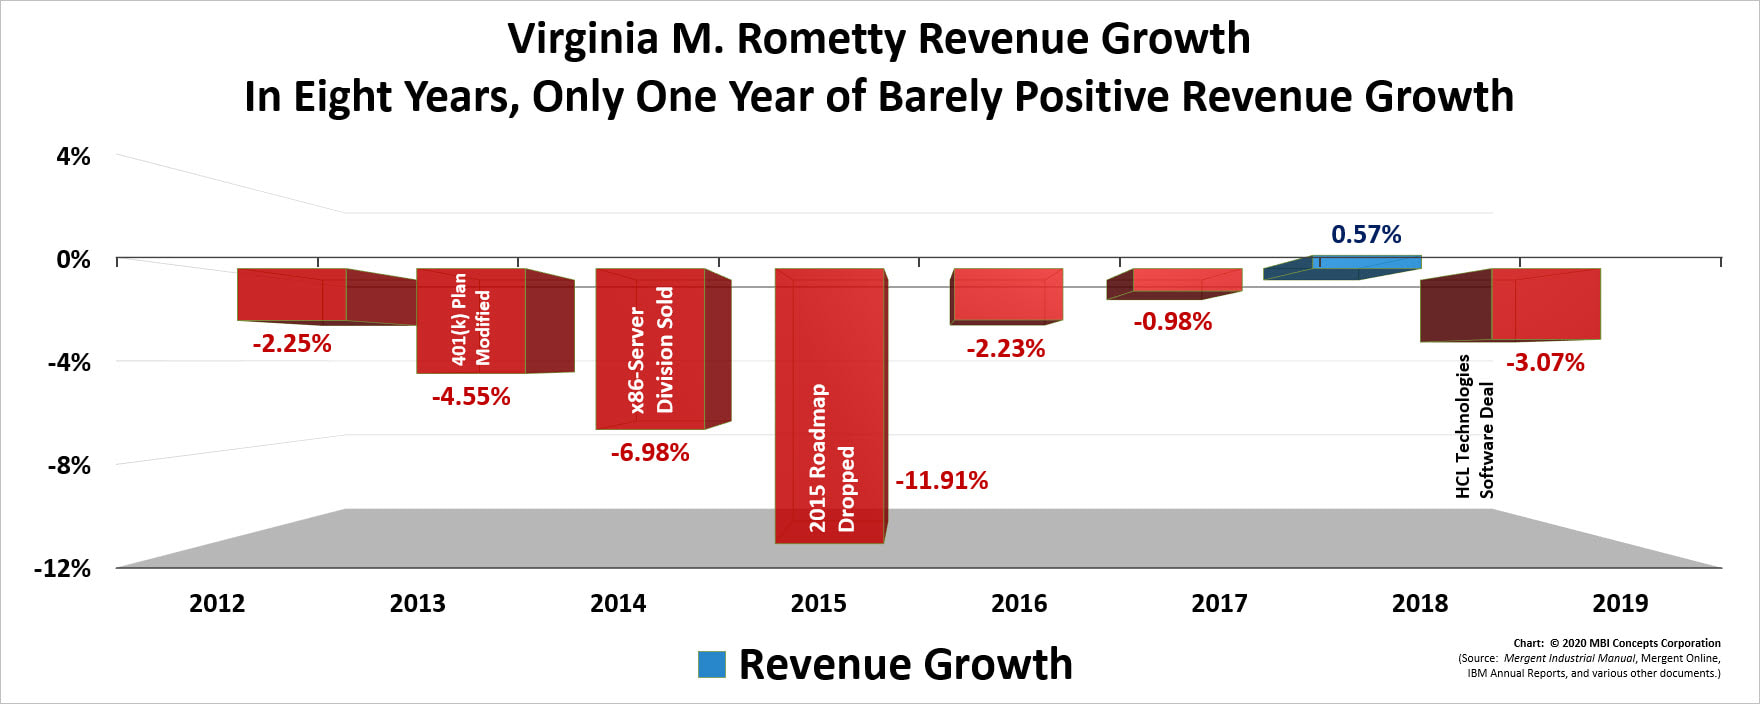 A color bar chart showing IBM's yearly revenue growth from 2012 through 2019 for Virginia M. (Ginni) Rometty.